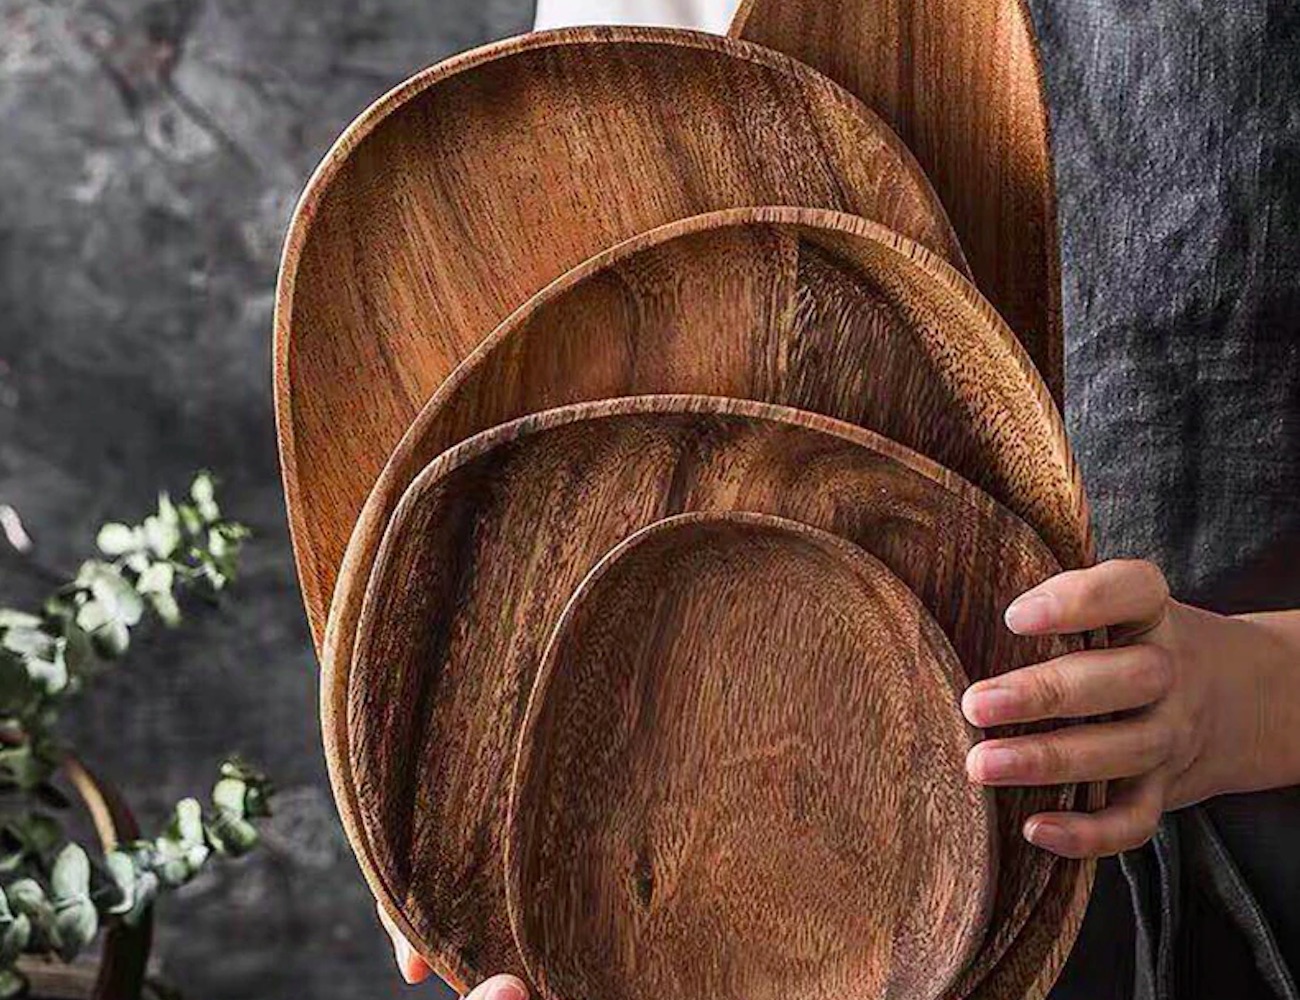 Eclectic Wooden Dinner Plates add rustic splendor to your table